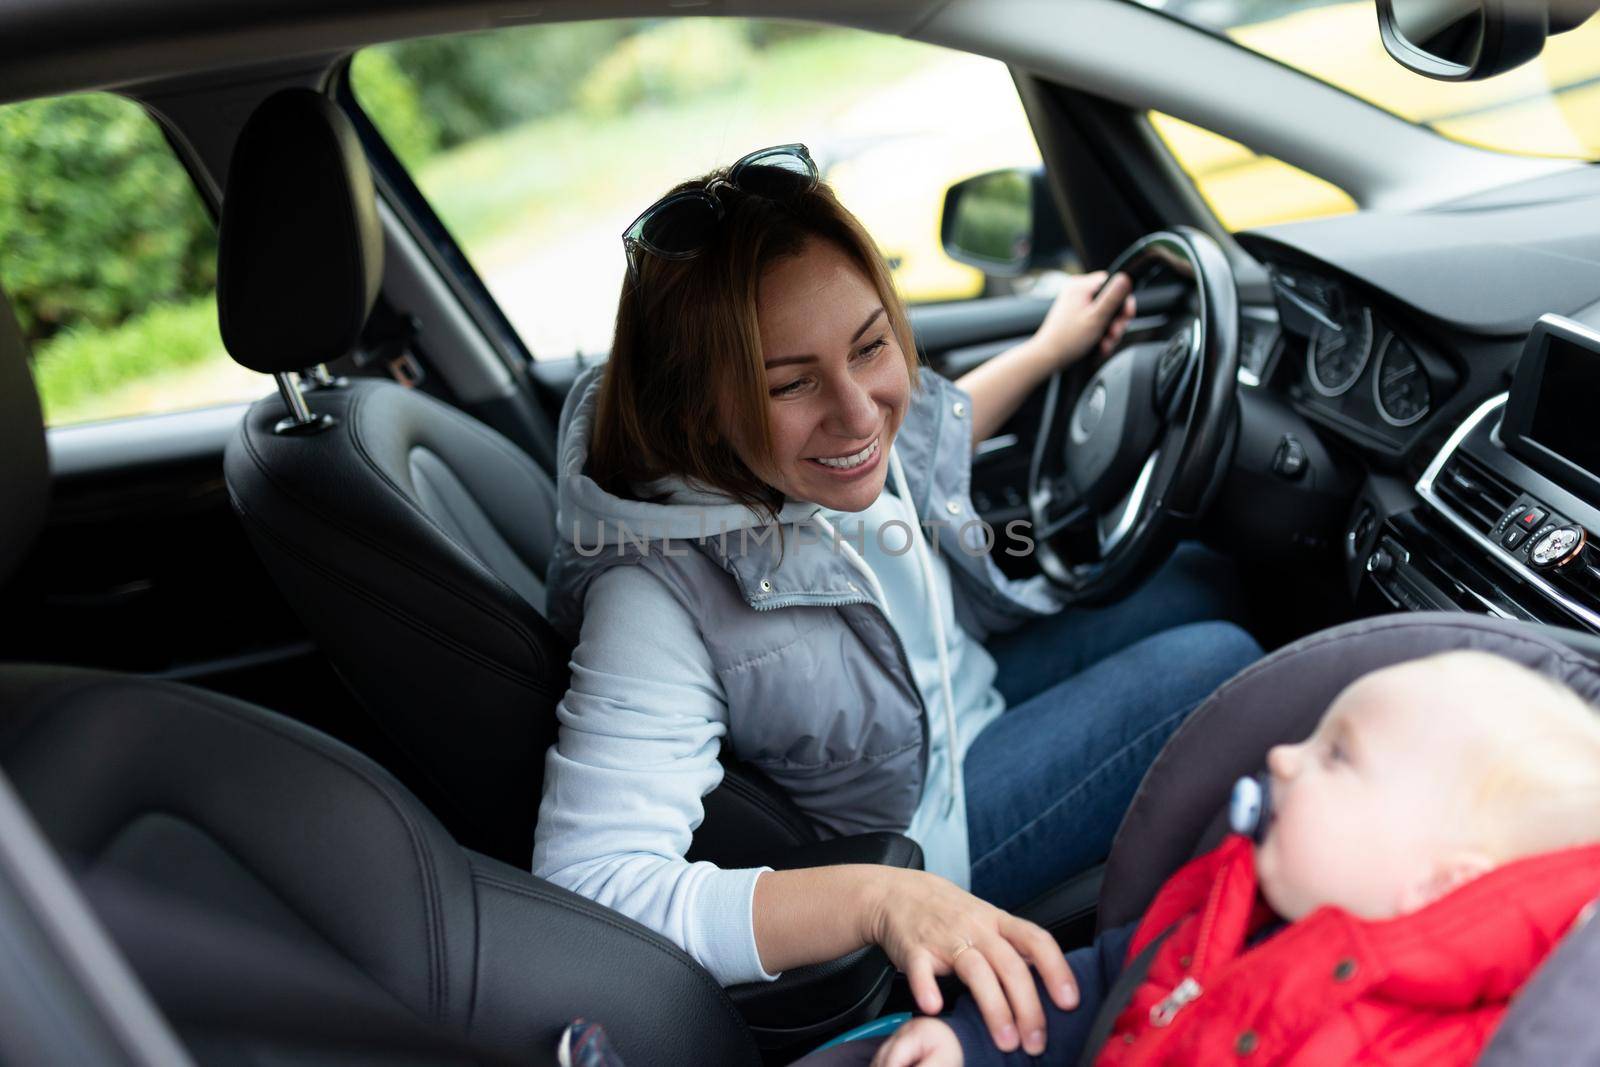 a young mother driving a car looks at a baby in a carrier in the front seat.